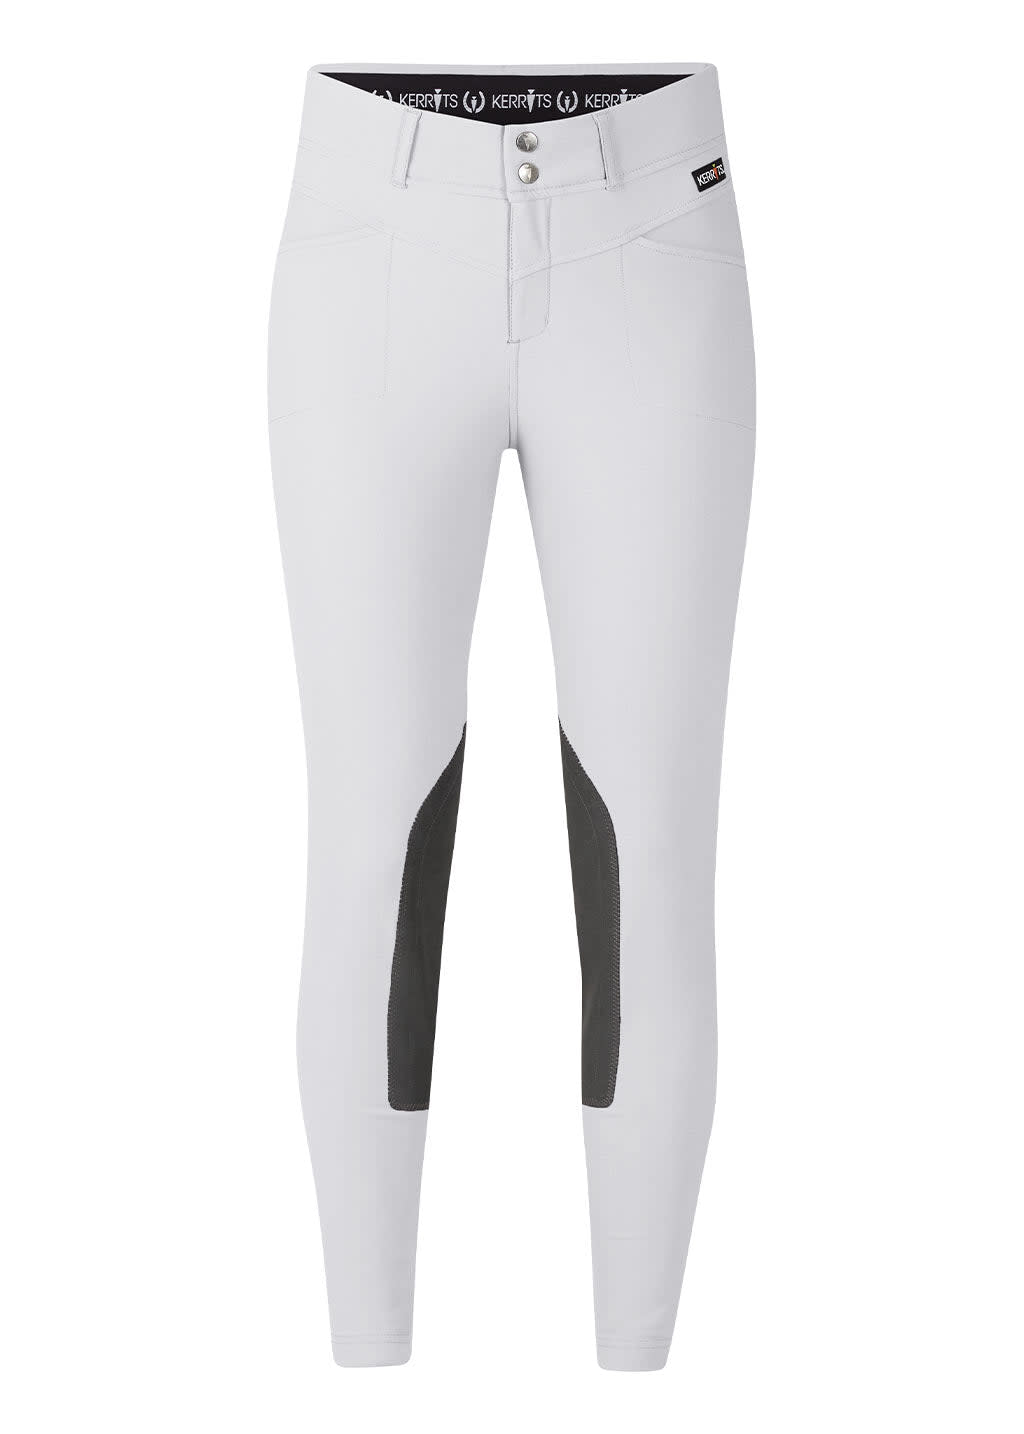 Kerrits Kids' Crossover II Knee Patch Breeches - White -  Kerrits-60545-WHITE - Tack Of The Day